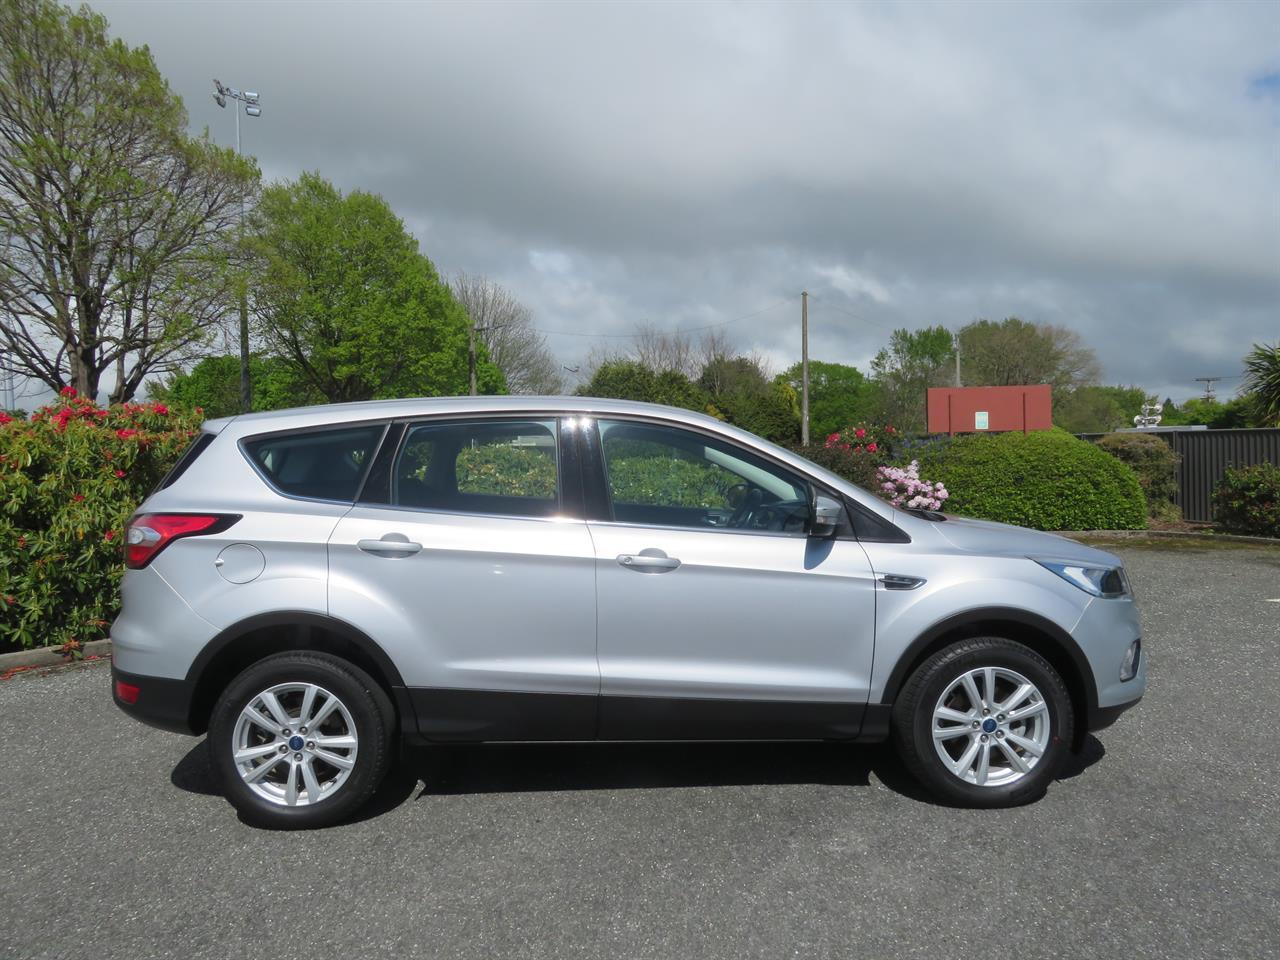 image-1, 2018 Ford Escape AMBIENTE - 4WD - LOW KM'S - NZ NE at Gore